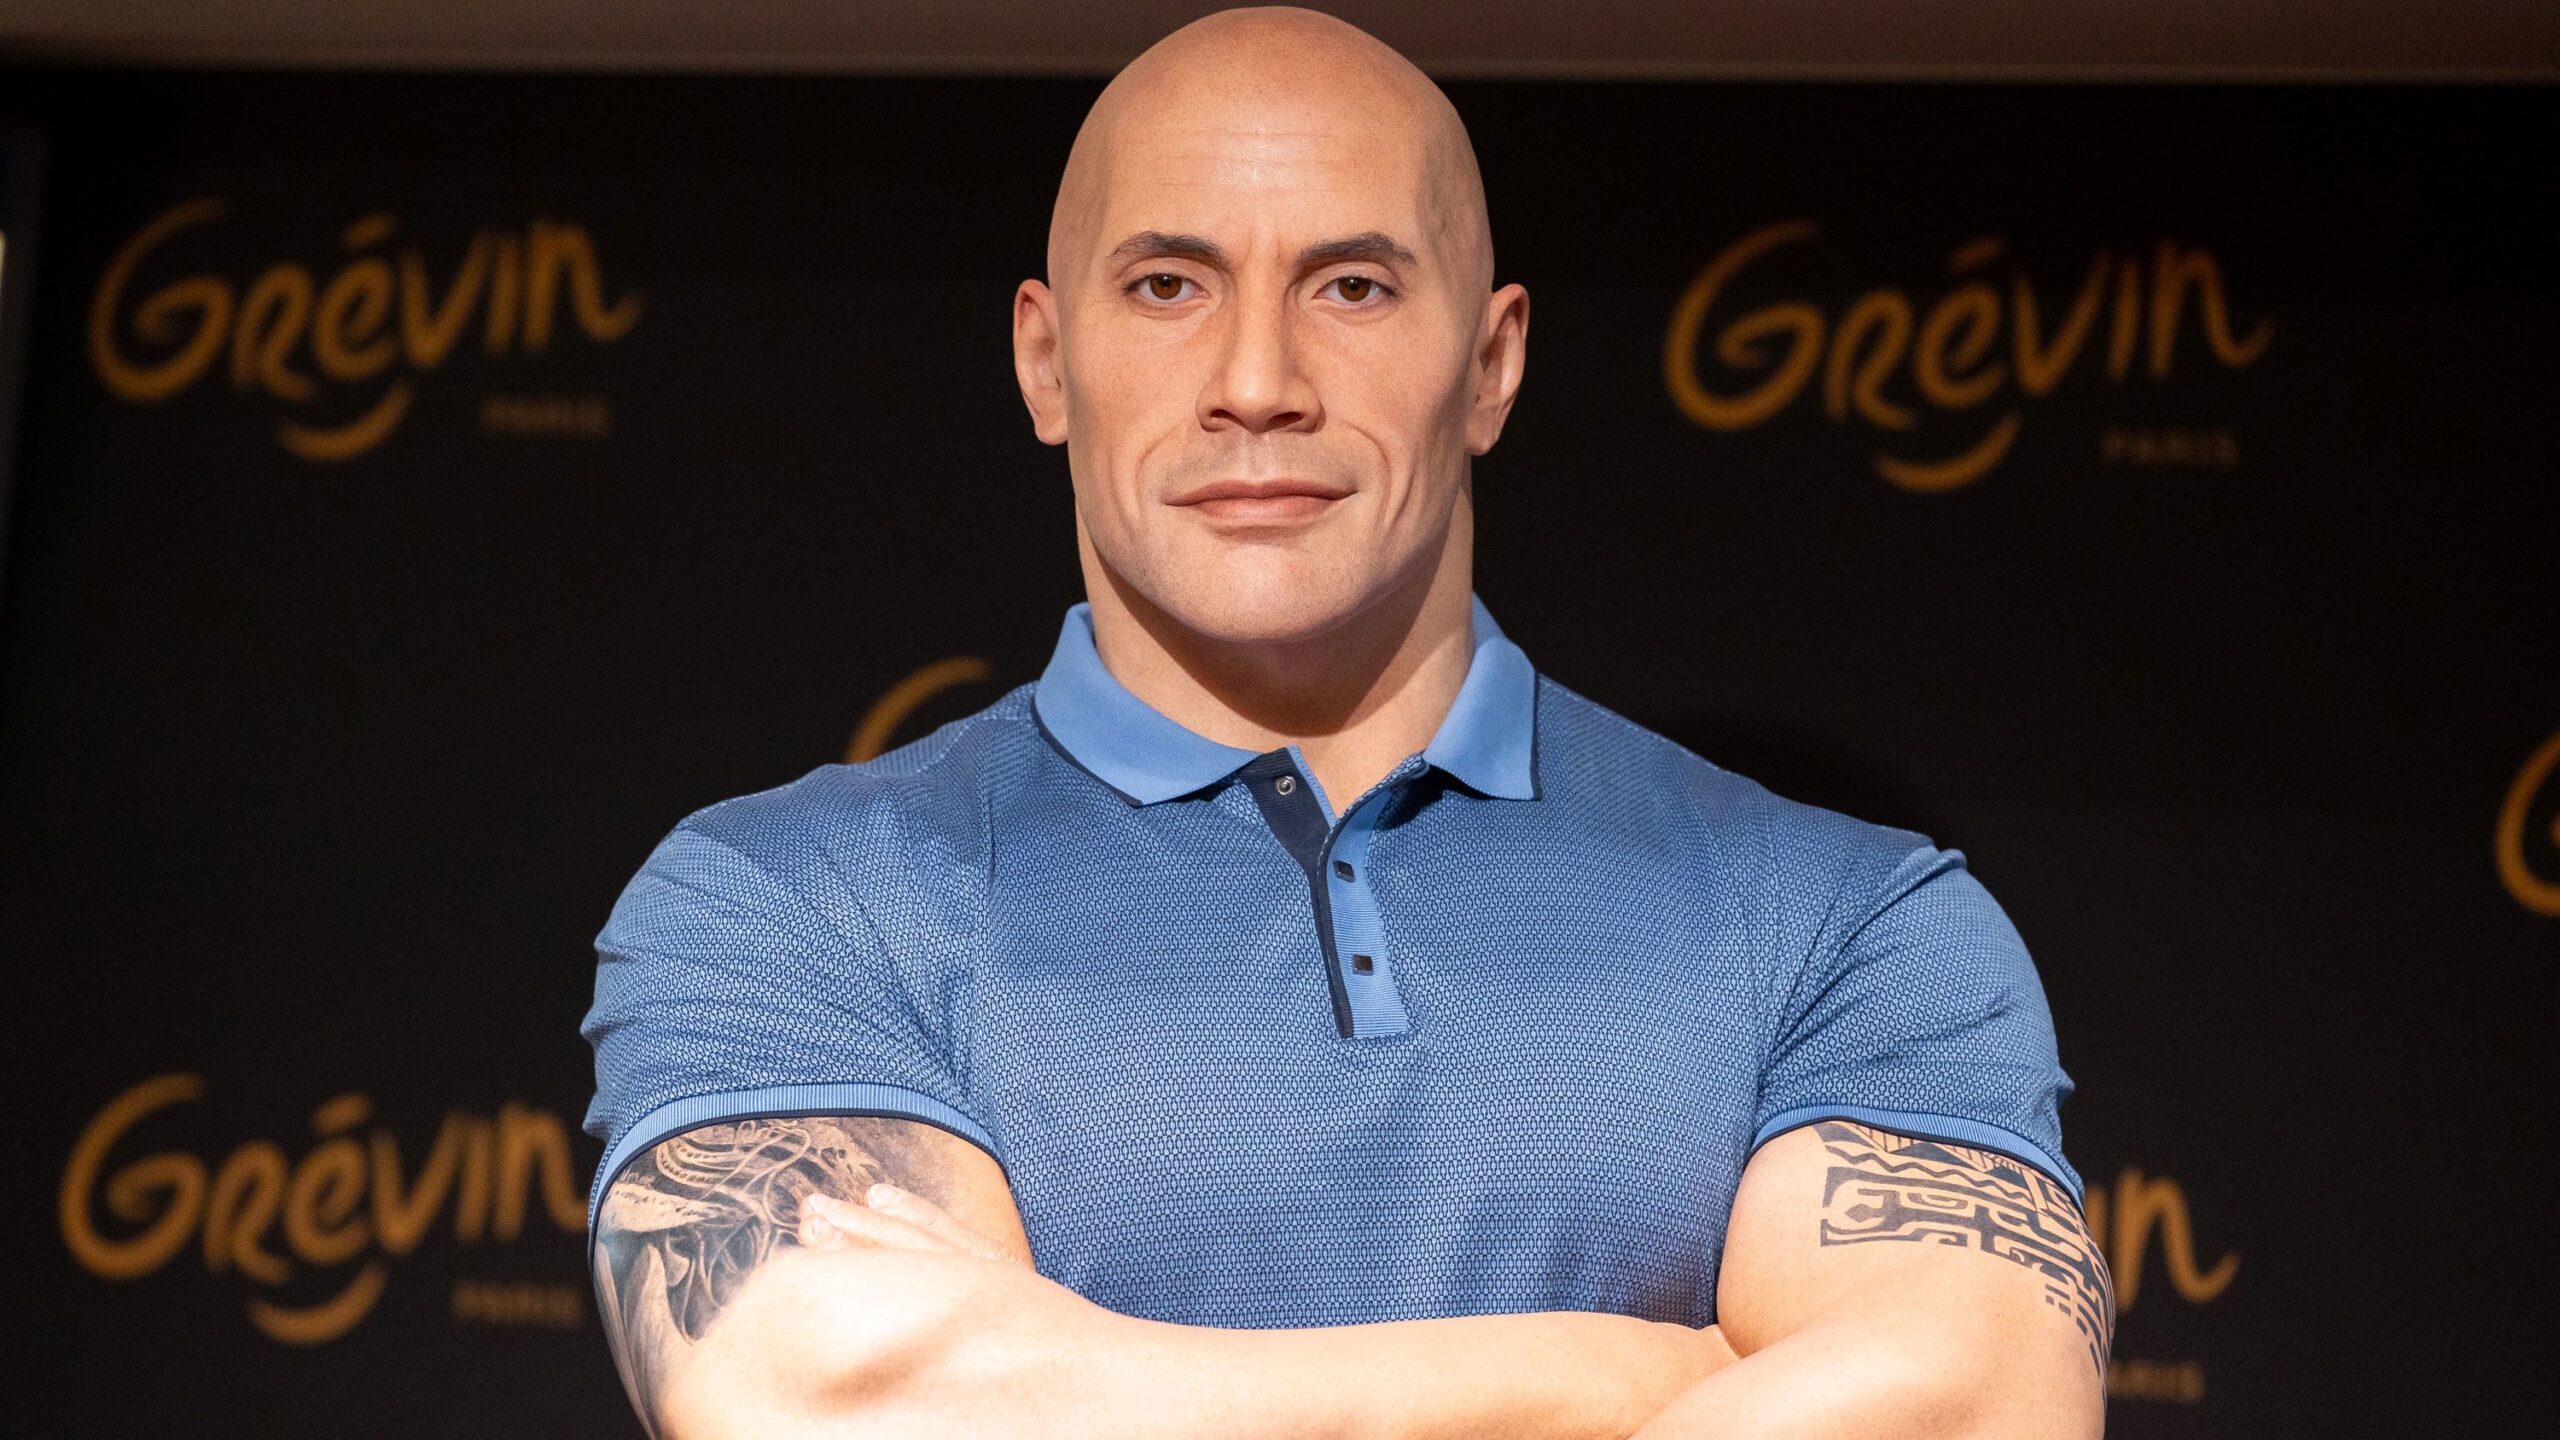 The Dwayne Johnson wax figure was unveiled last week at Musée Grevin in Paris, France....